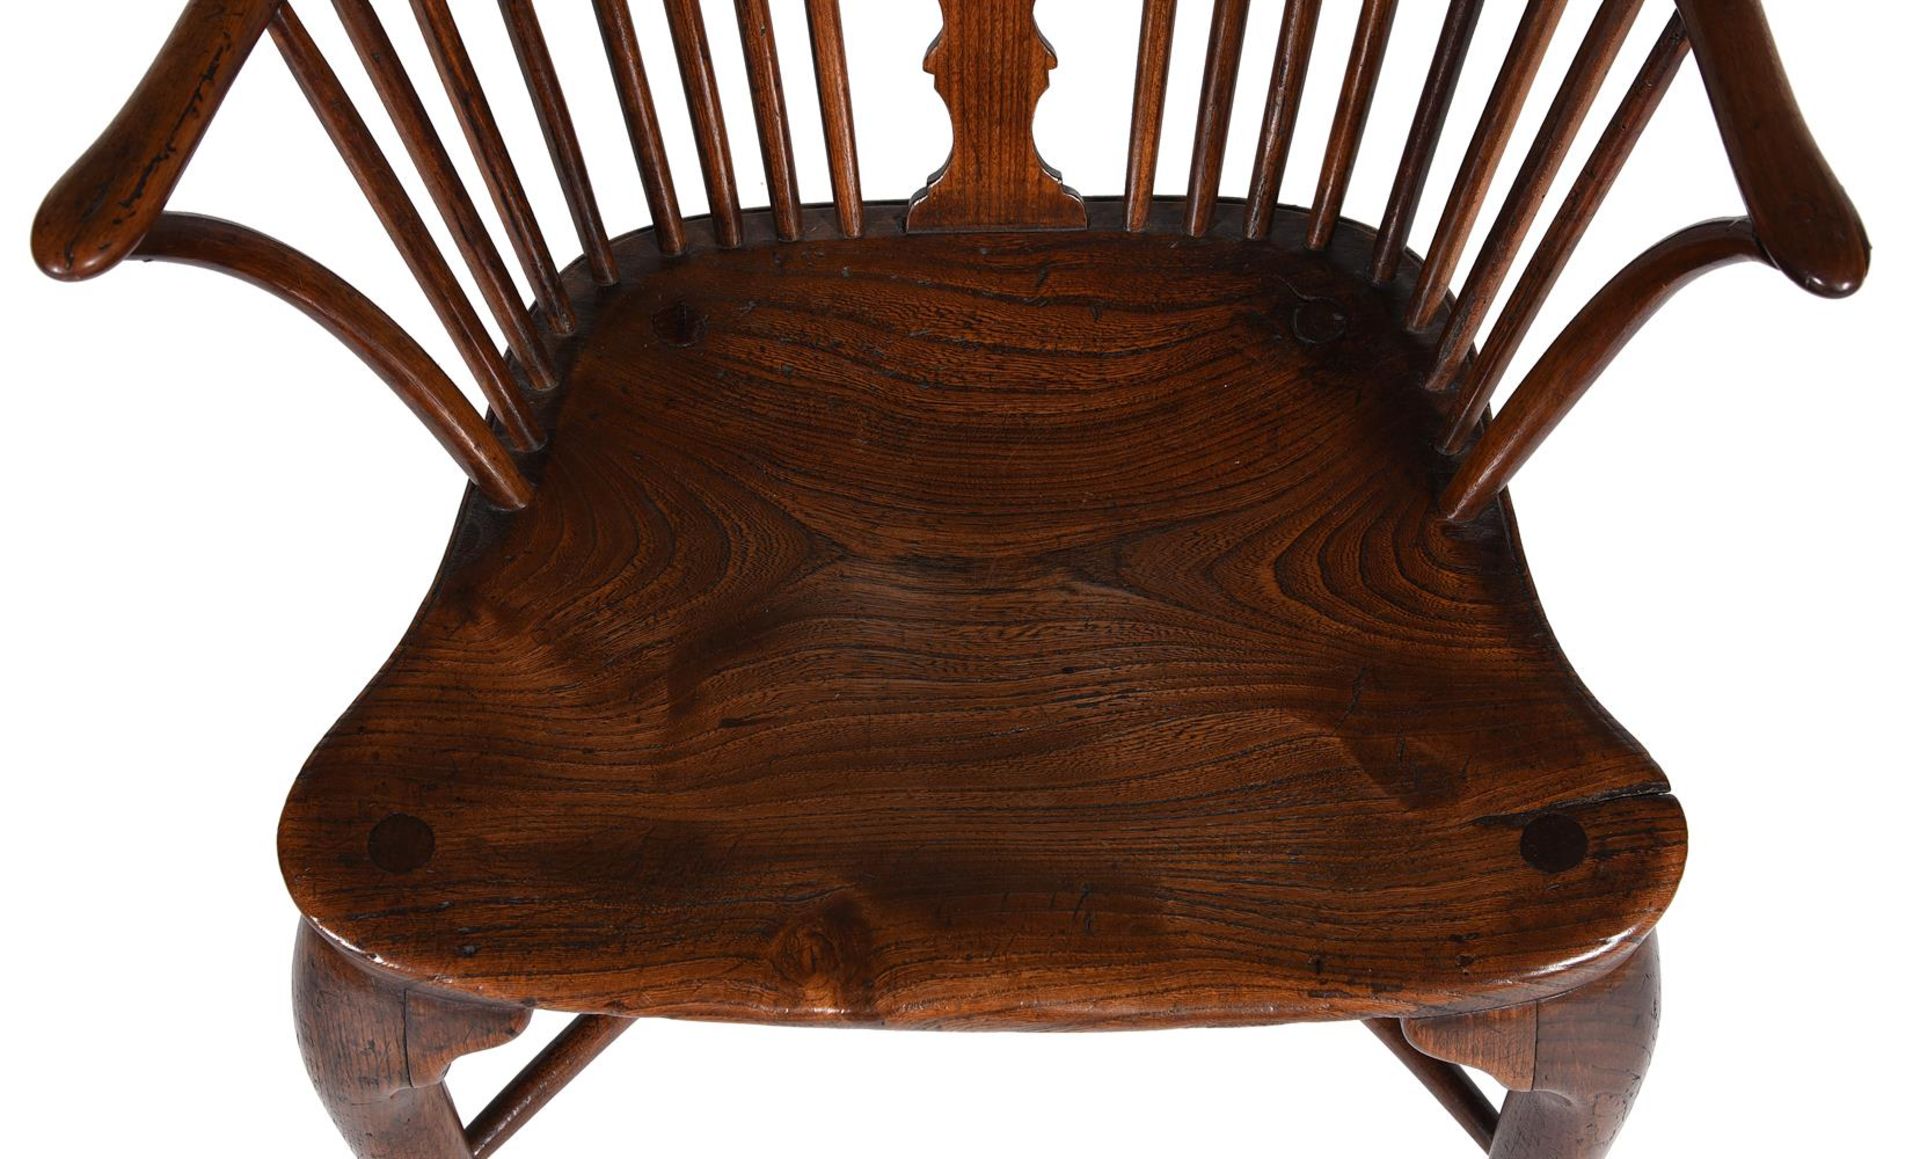 A FRUITWOOD, ELM AND ASH WINDSOR ARMCHAIR, LAST QUARTER 18TH CENTURY - Image 6 of 6